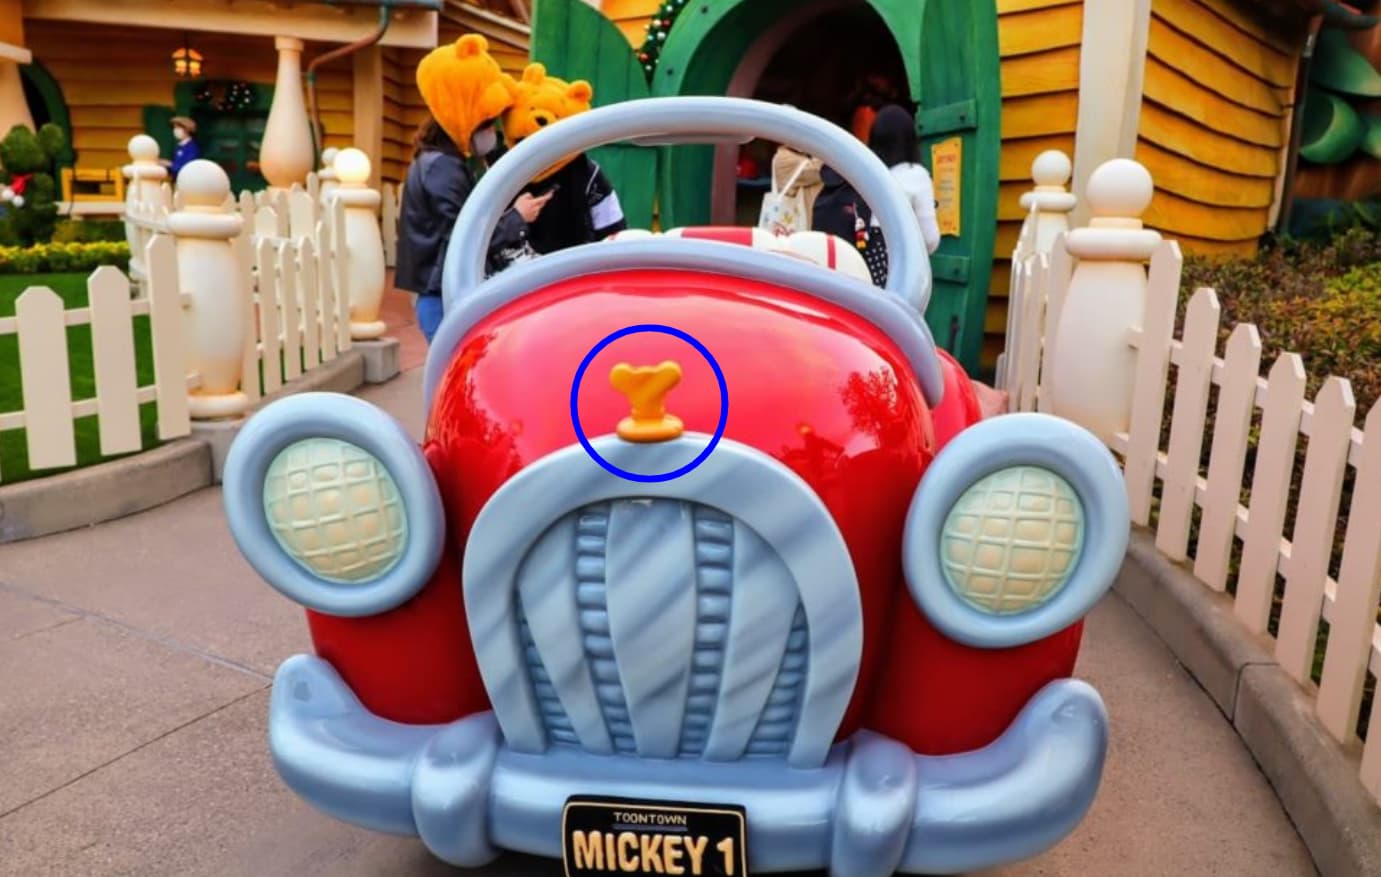 Hidden Mickey on the emblem of the car in front of Mickey's house